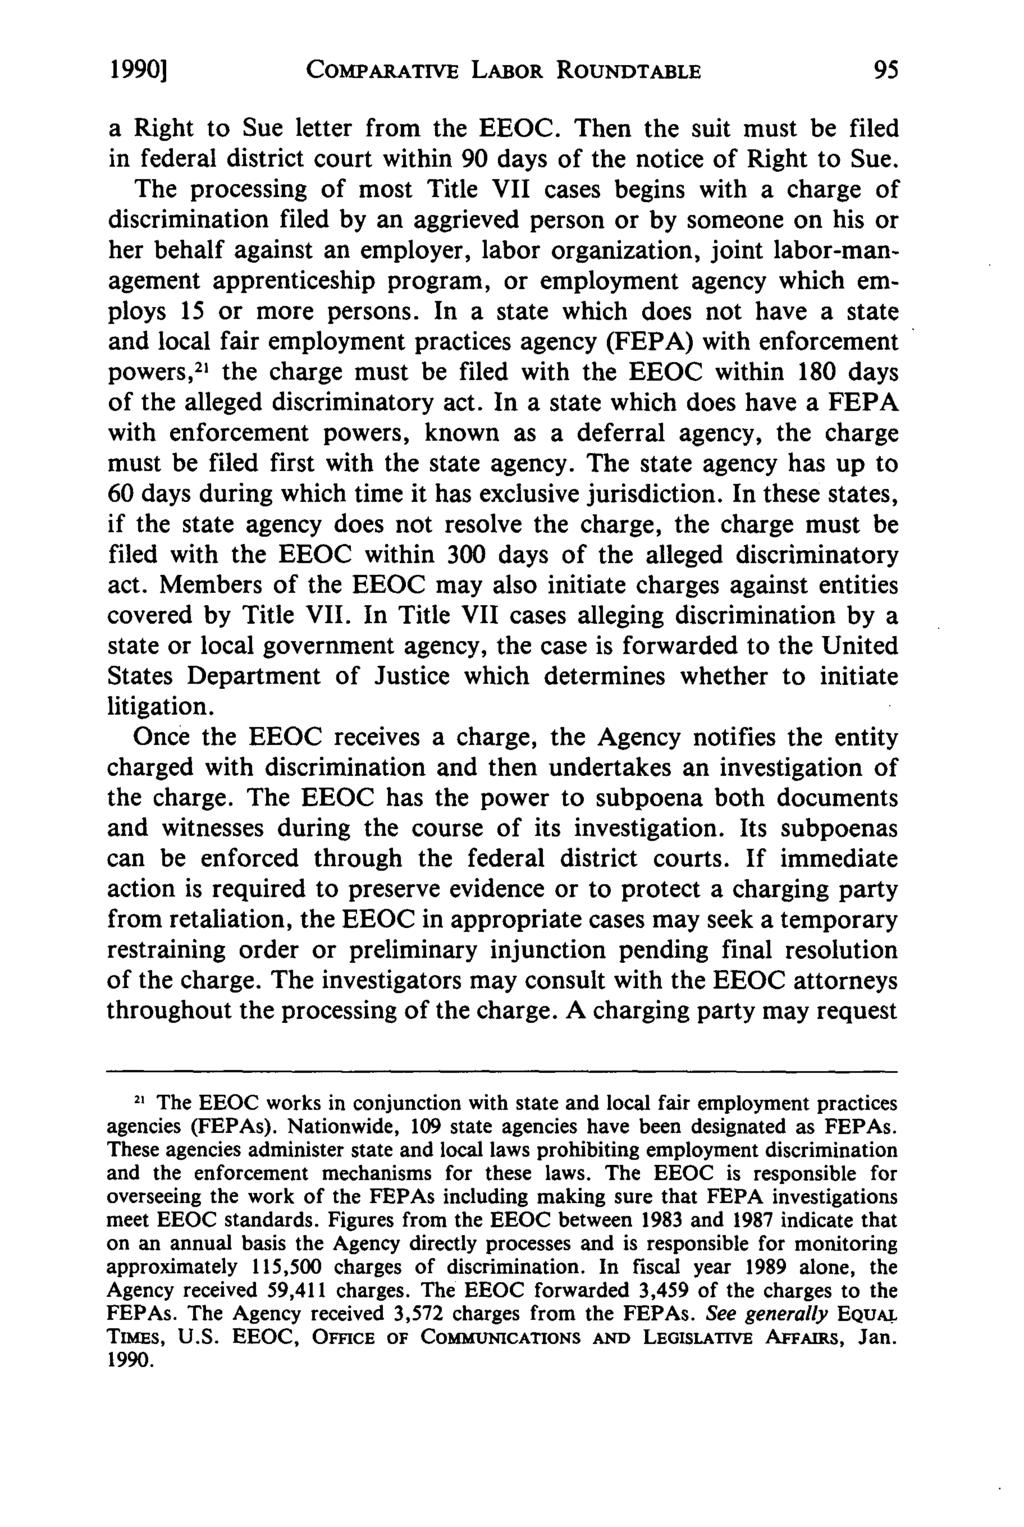 1990] COMPARATIVE LABOR ROUNDTABLE a Right to Sue letter from the EEOC. Then the suit must be filed in federal district court within 90 days of the notice of Right to Sue.